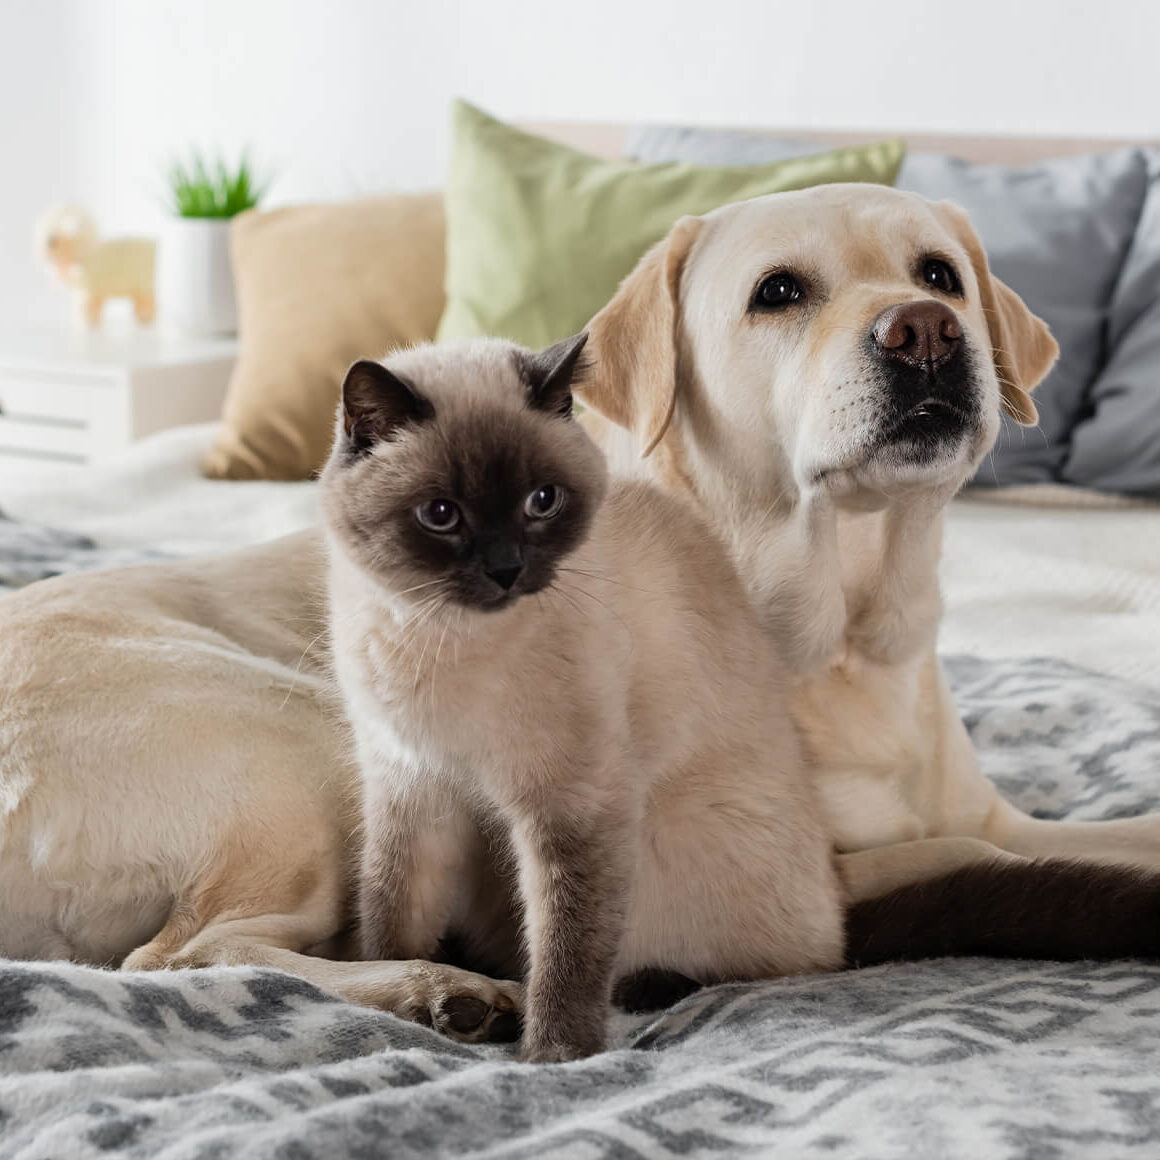 tan dog and cat sitting on bed